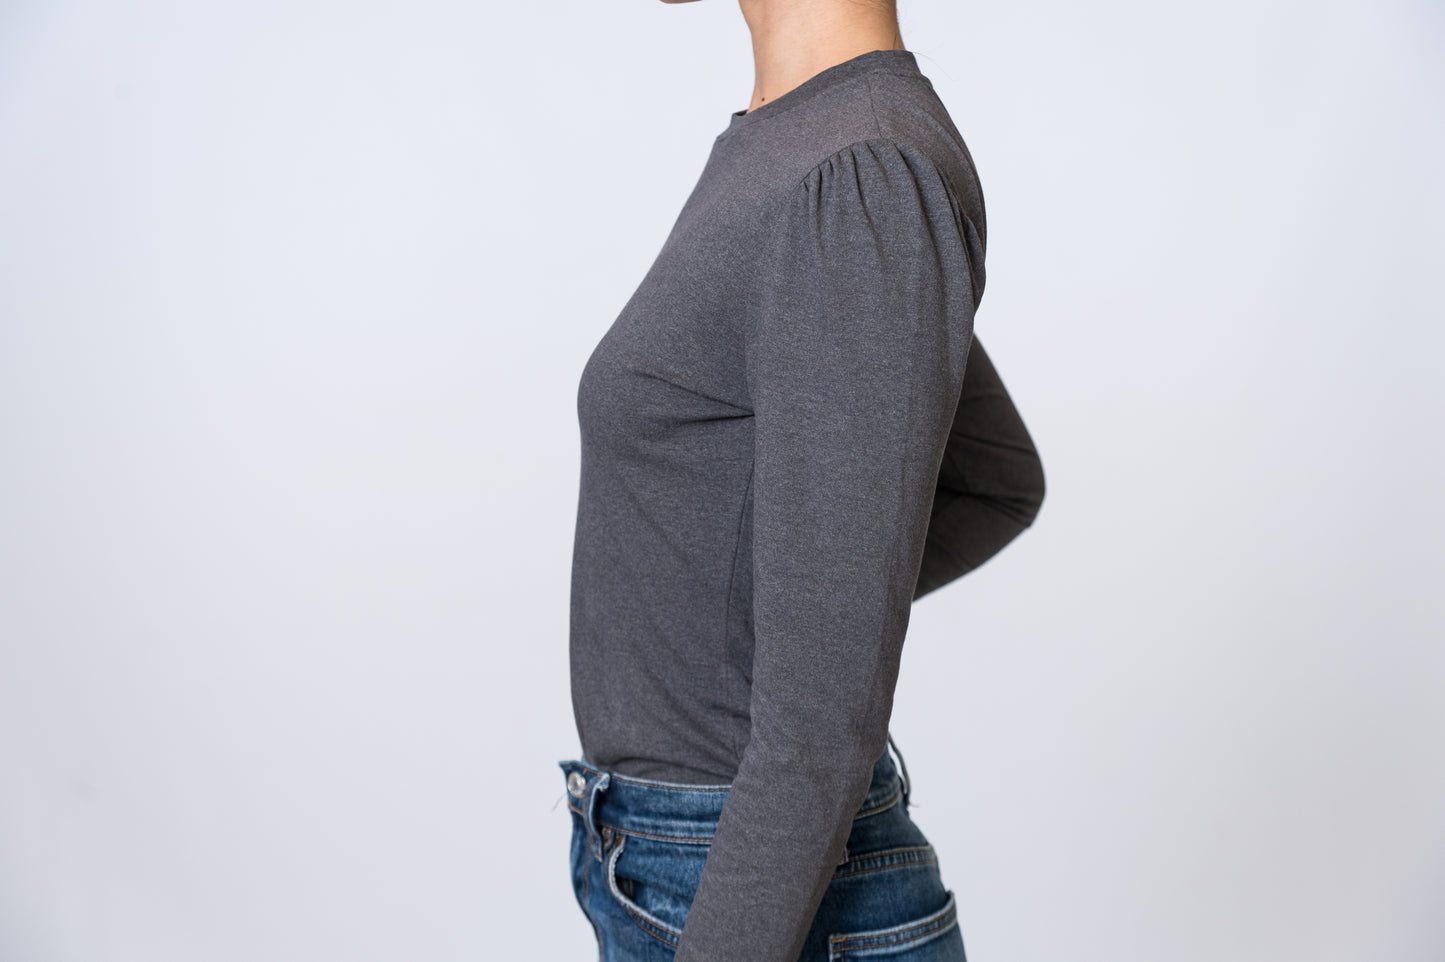 Woman wearing a gray, long sleeve top with puff sleeves and medium wash jeans. Side of clothing is being shown